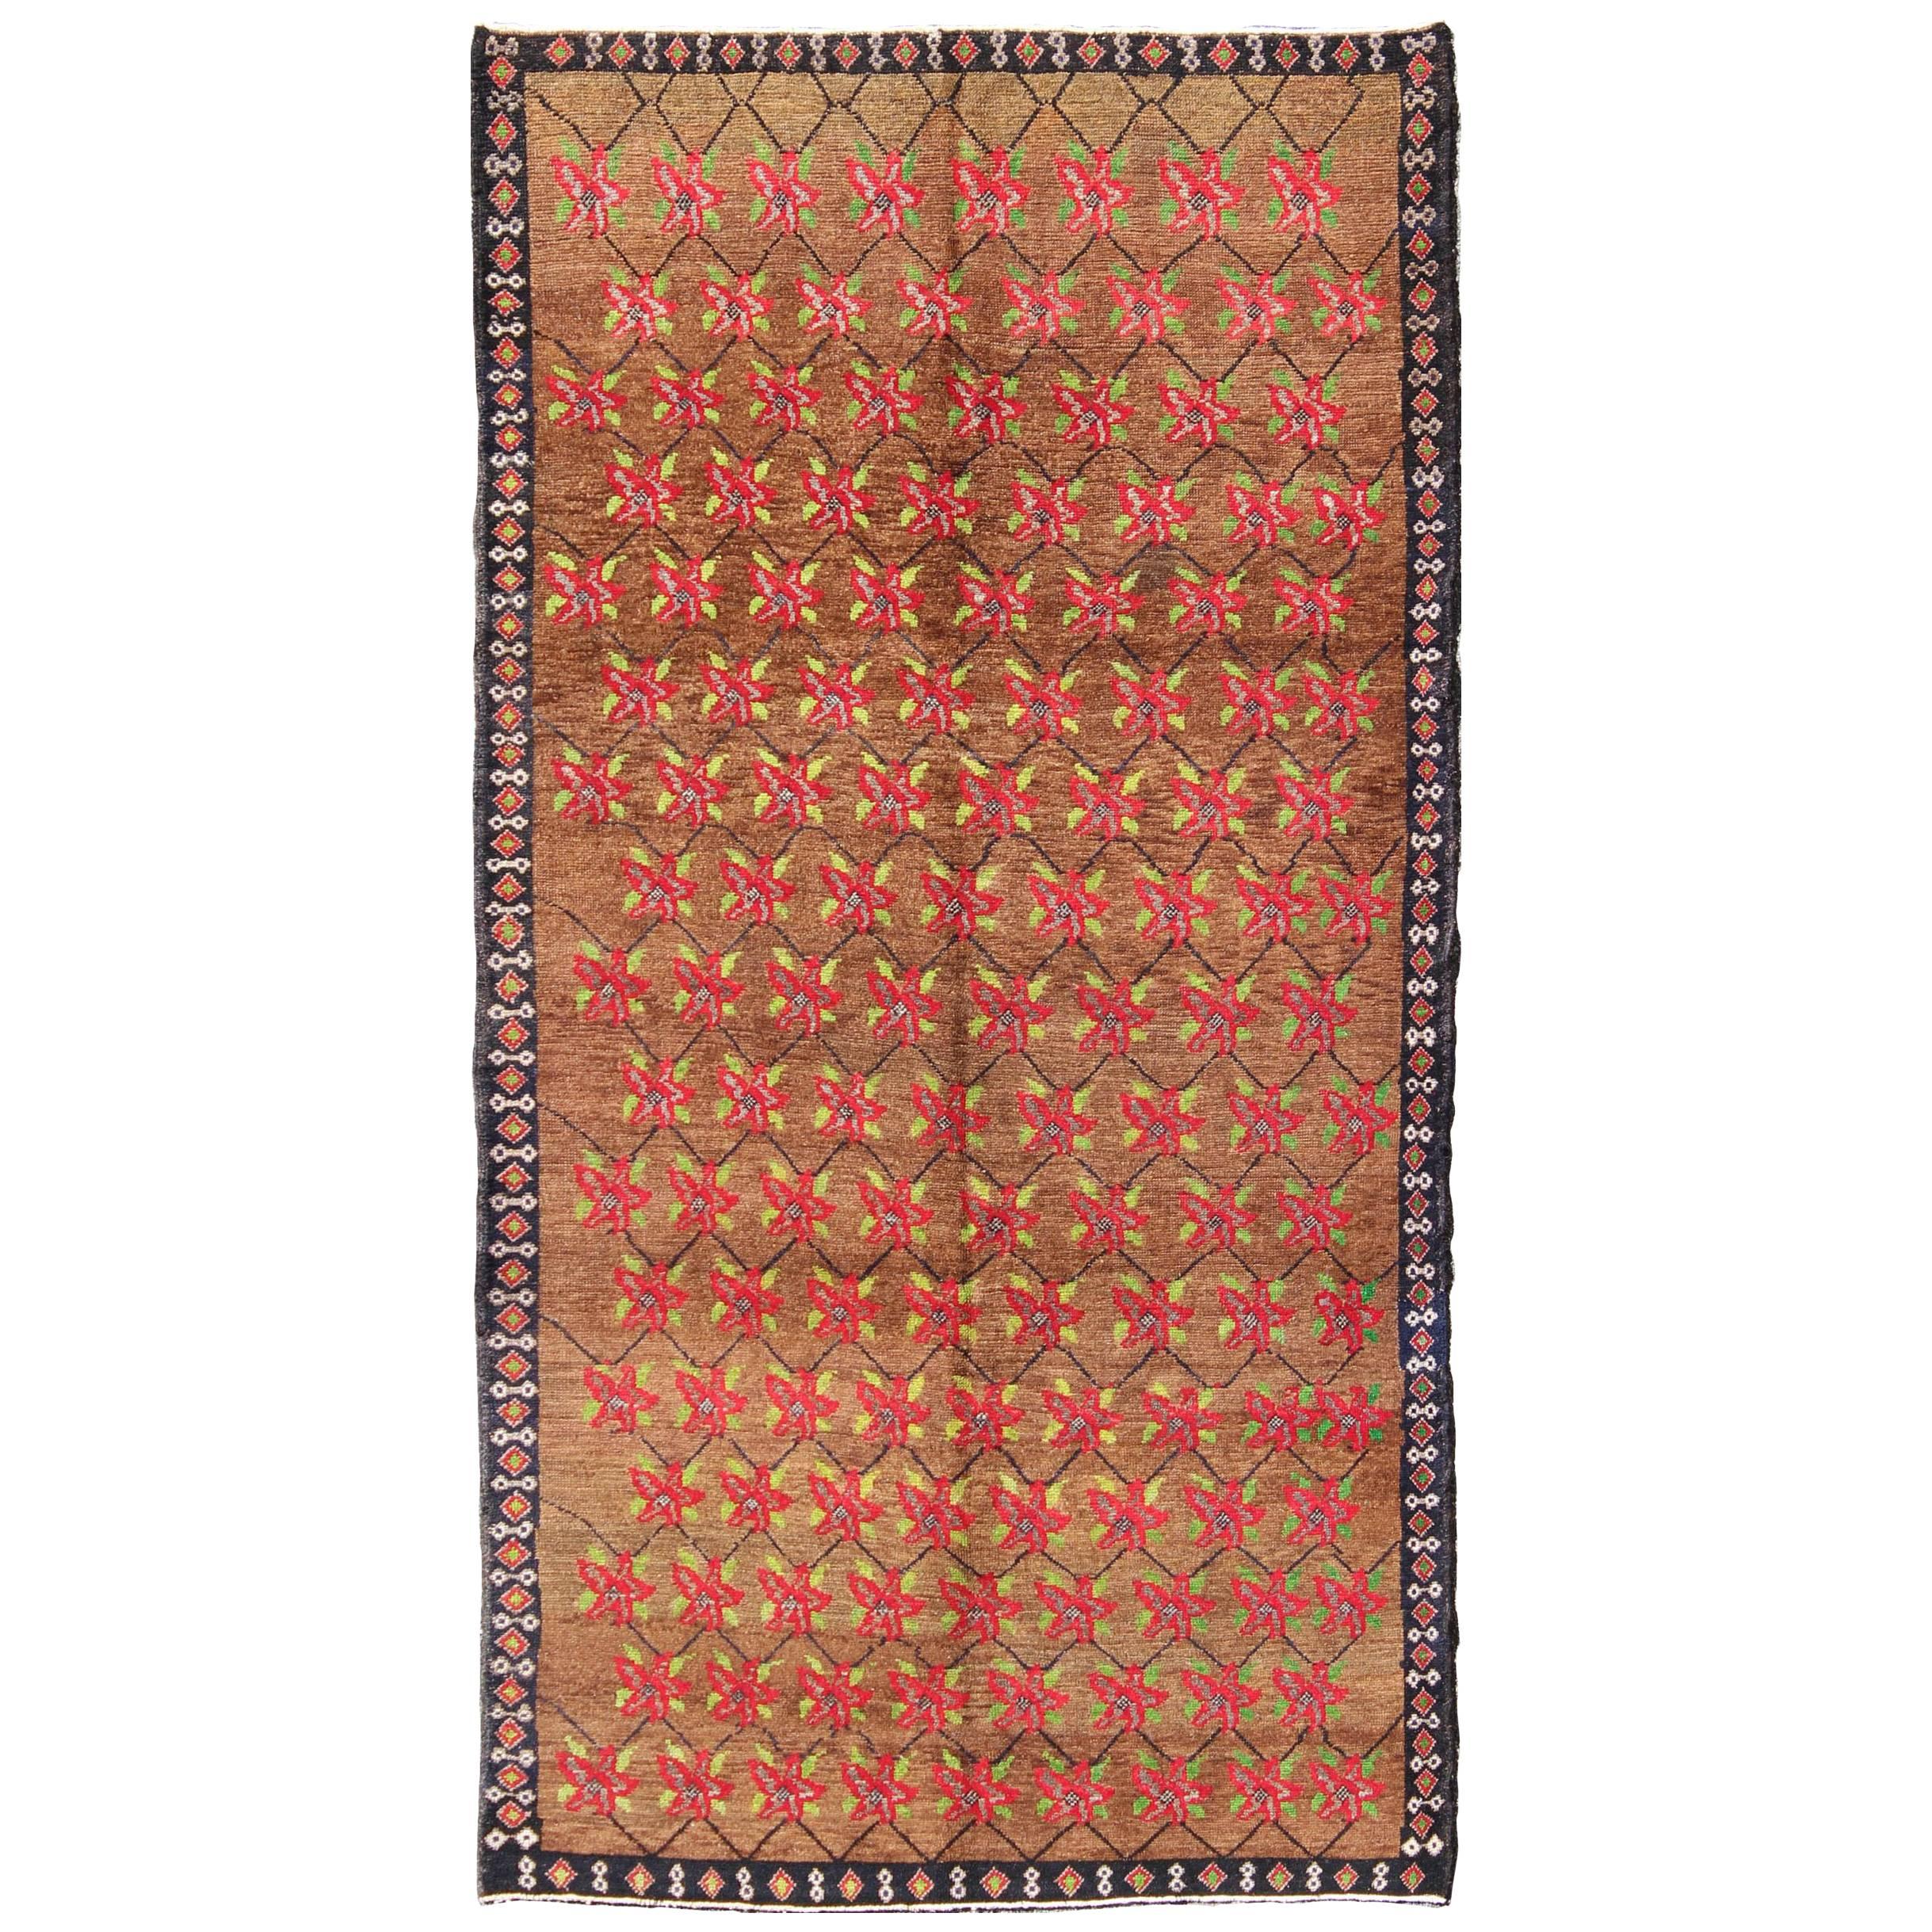 Turkish Oushak Carpet with Poinsettia Design With A Light Brown Background For Sale